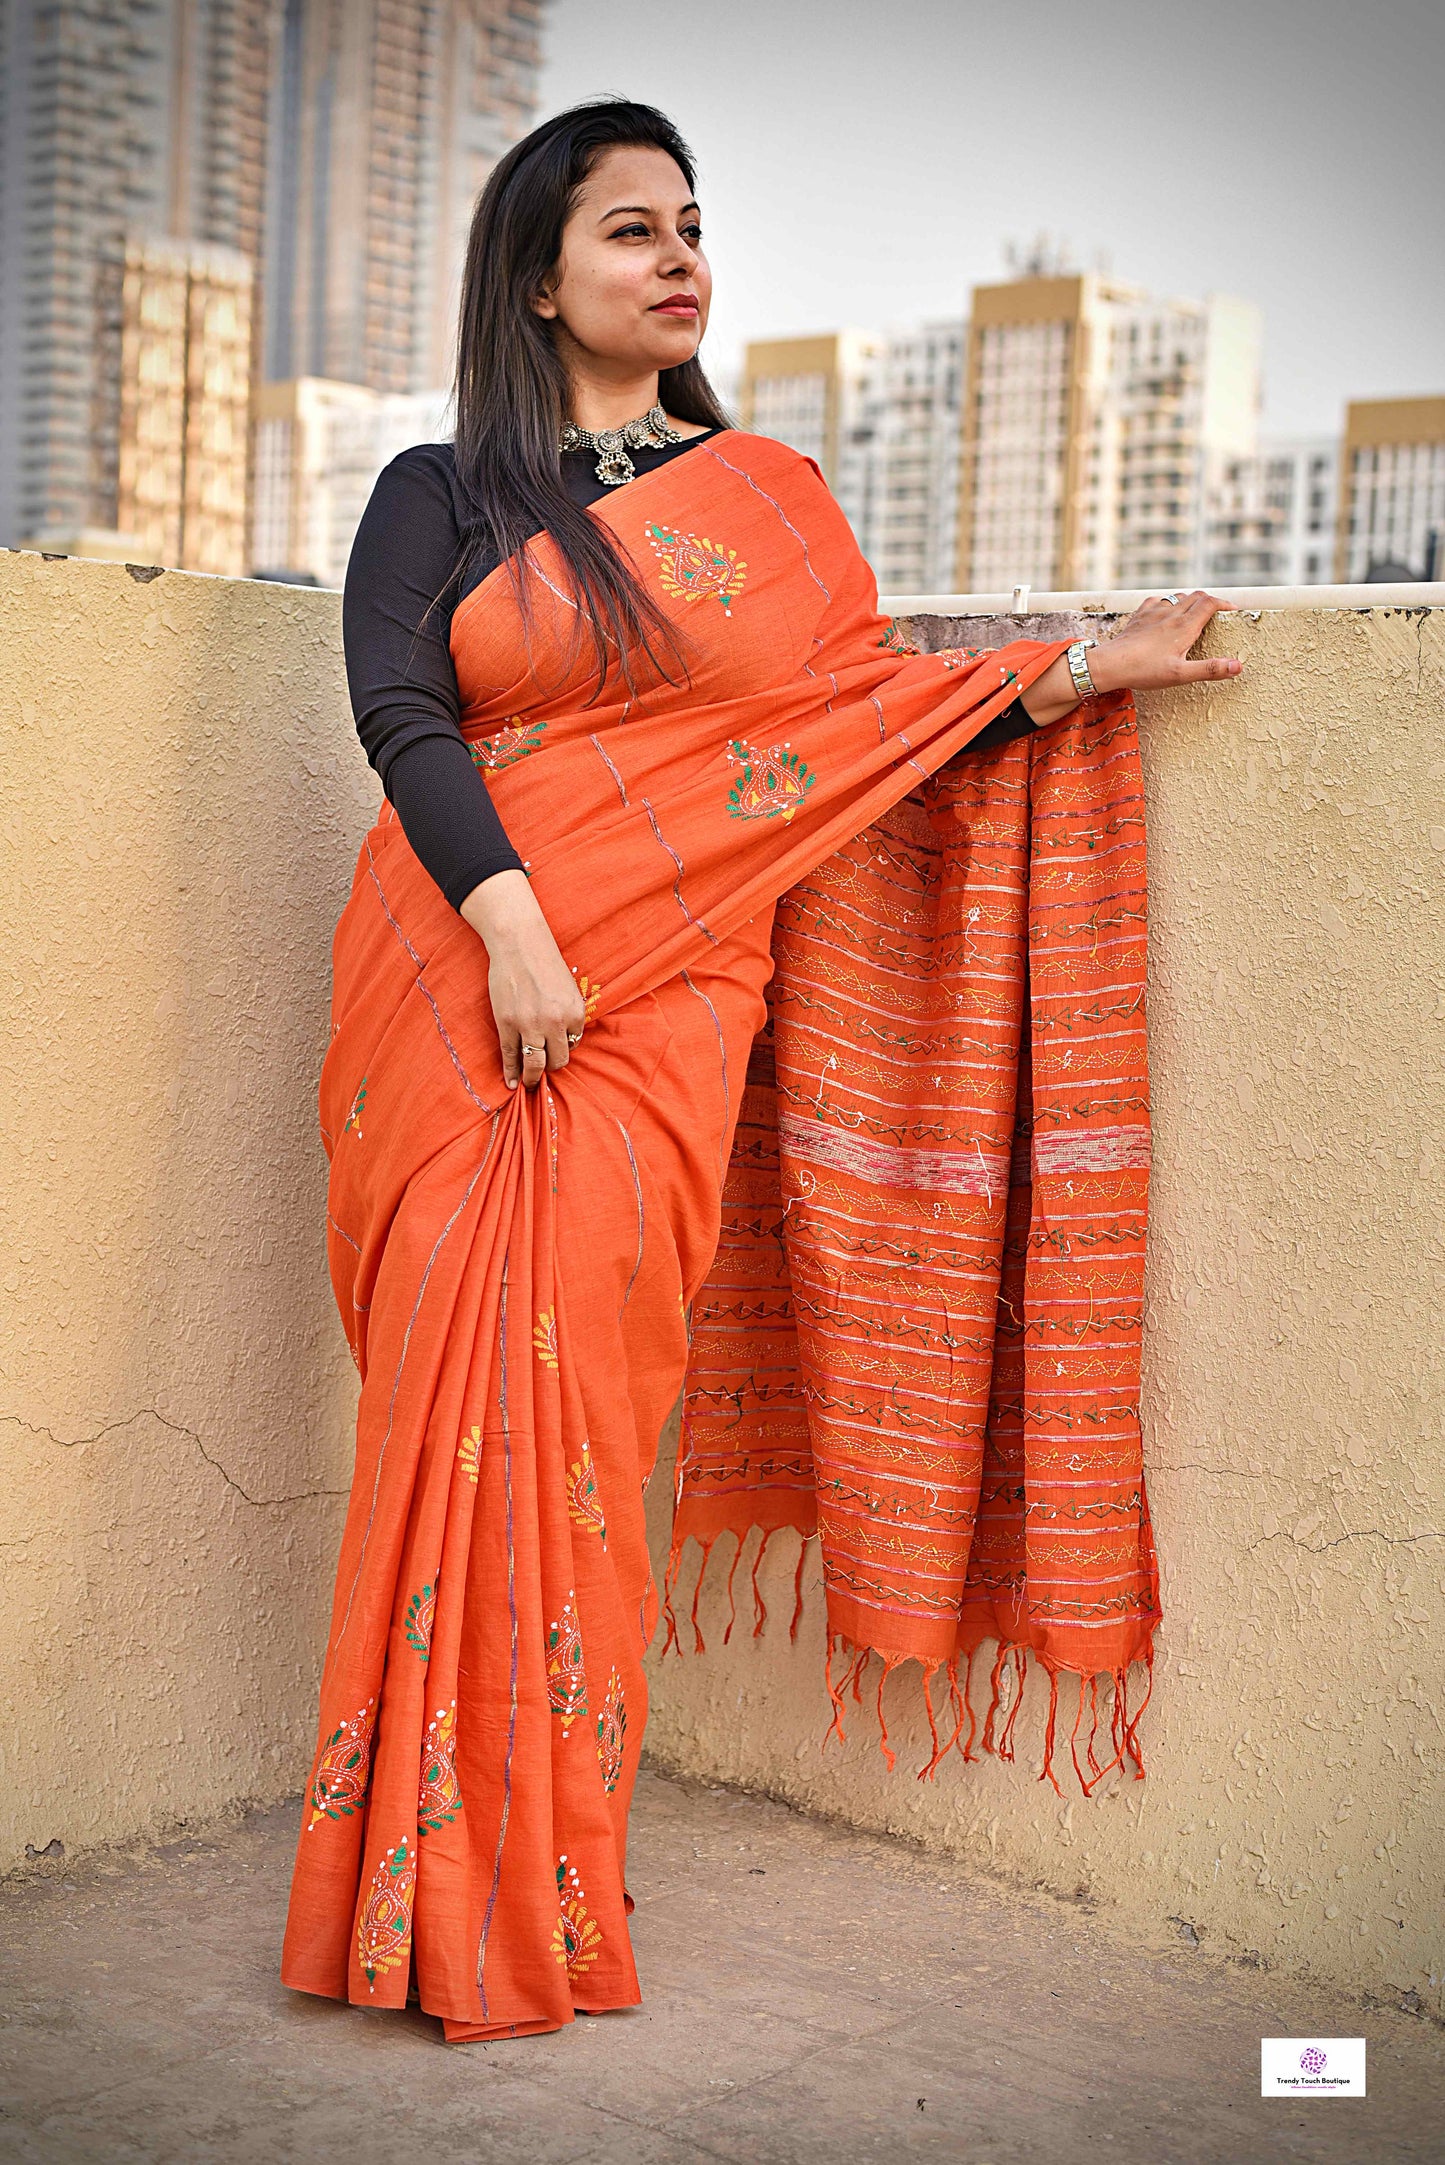 Orange green yellow white khesh khadi cotton handloom saree with hand embroidered kantha stitch summer celebration marriage function saree style with blouse piece 